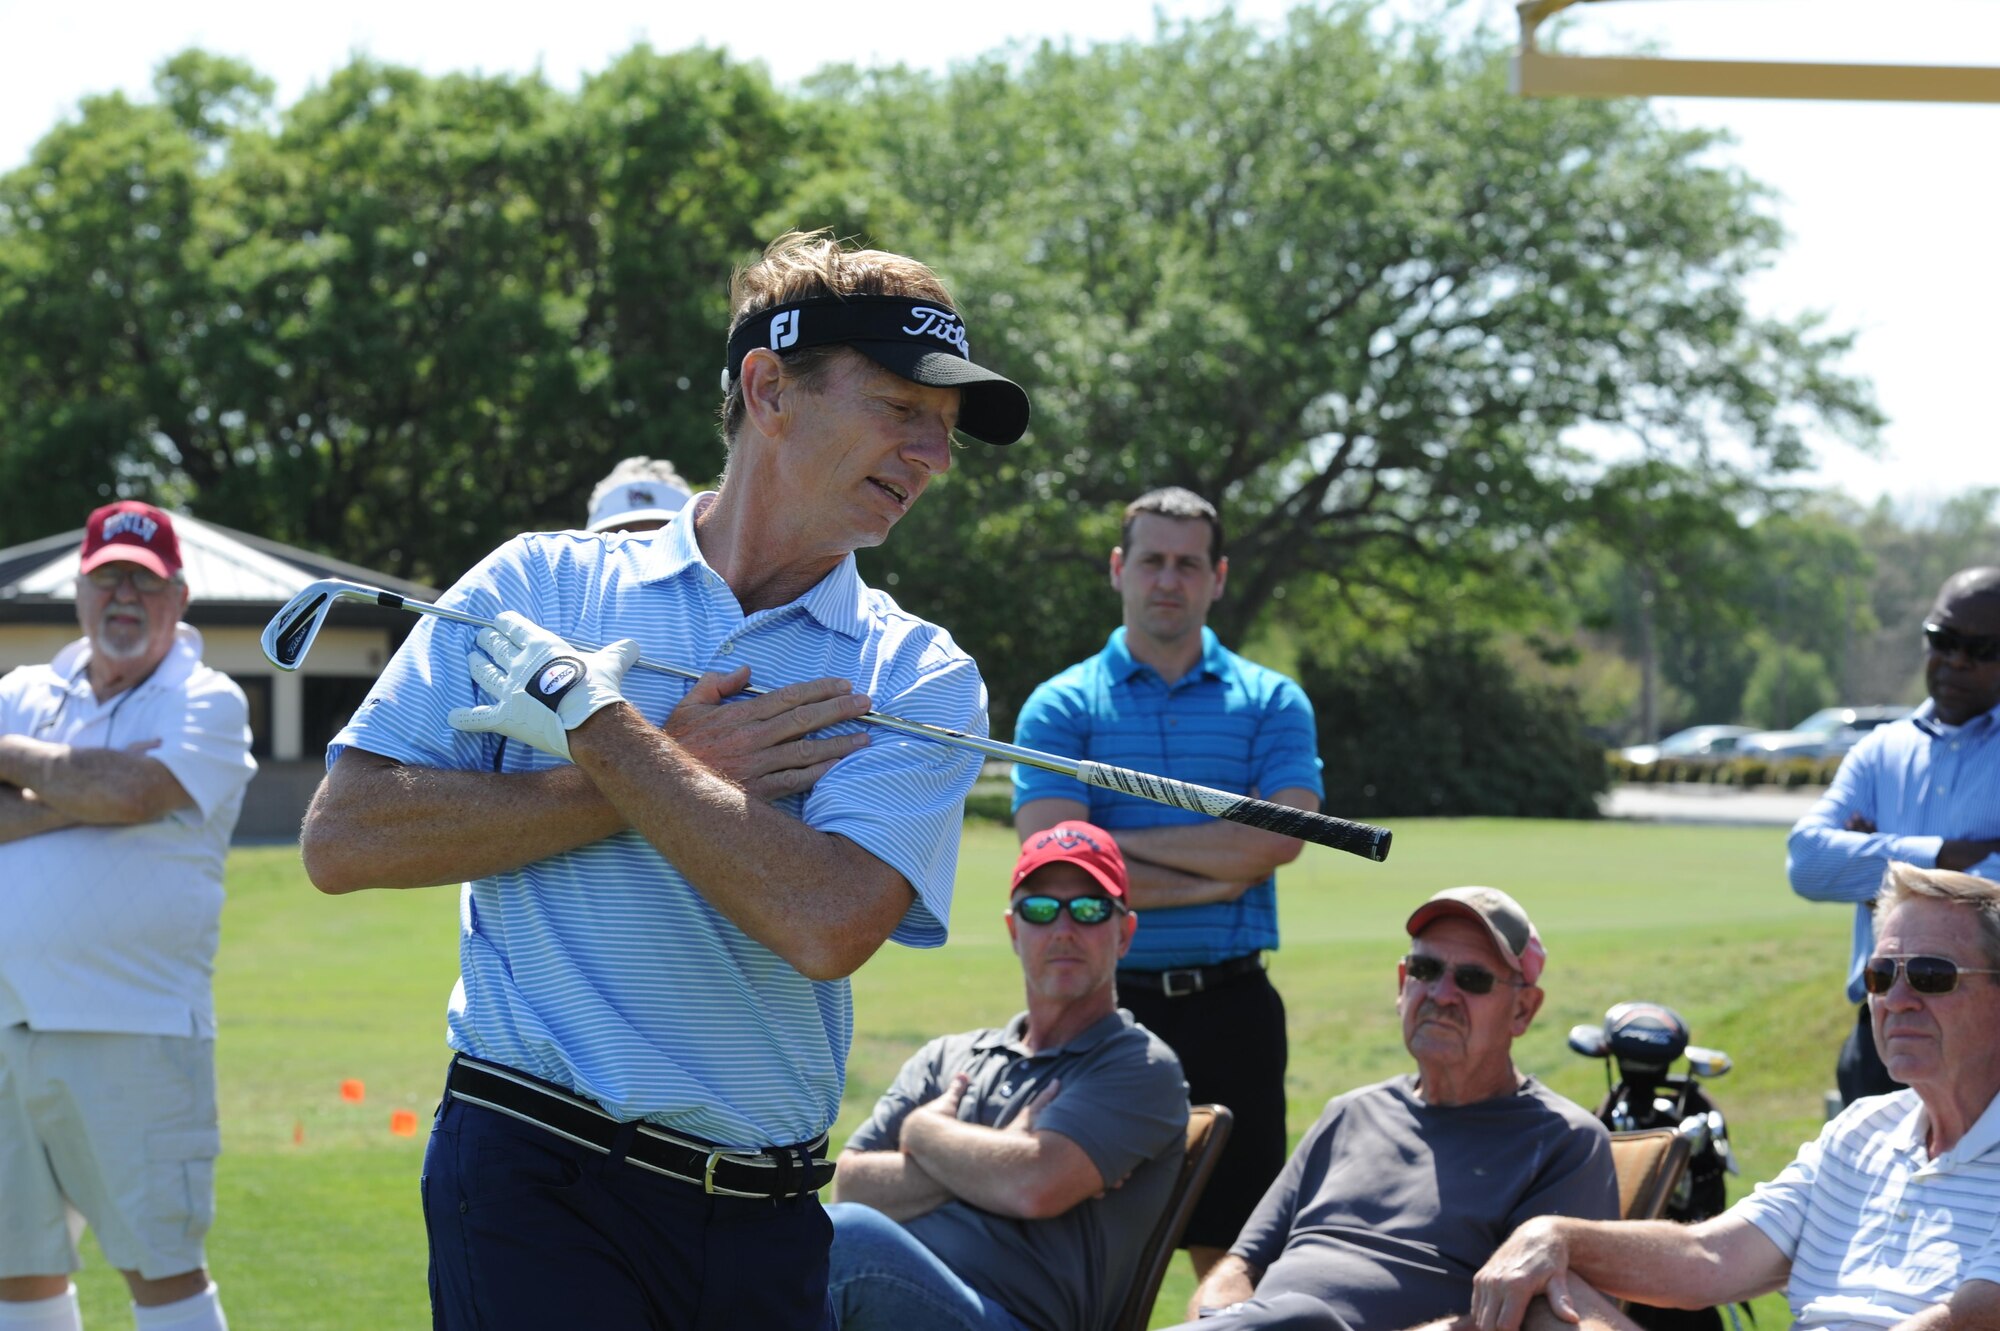 Brad Faxon, Professional Golfers’ Association champion player, provides golfing tips to Keesler personnel during a free clinic at the Bay Breeze Golf Course March 29, 2017, on Keesler Air Force Base, Miss. Faxon is an eight-time PGA Tour Champion and this is the third time he has held a clinic at Keesler. (U.S. Air Force photo by Kemberly Groue)